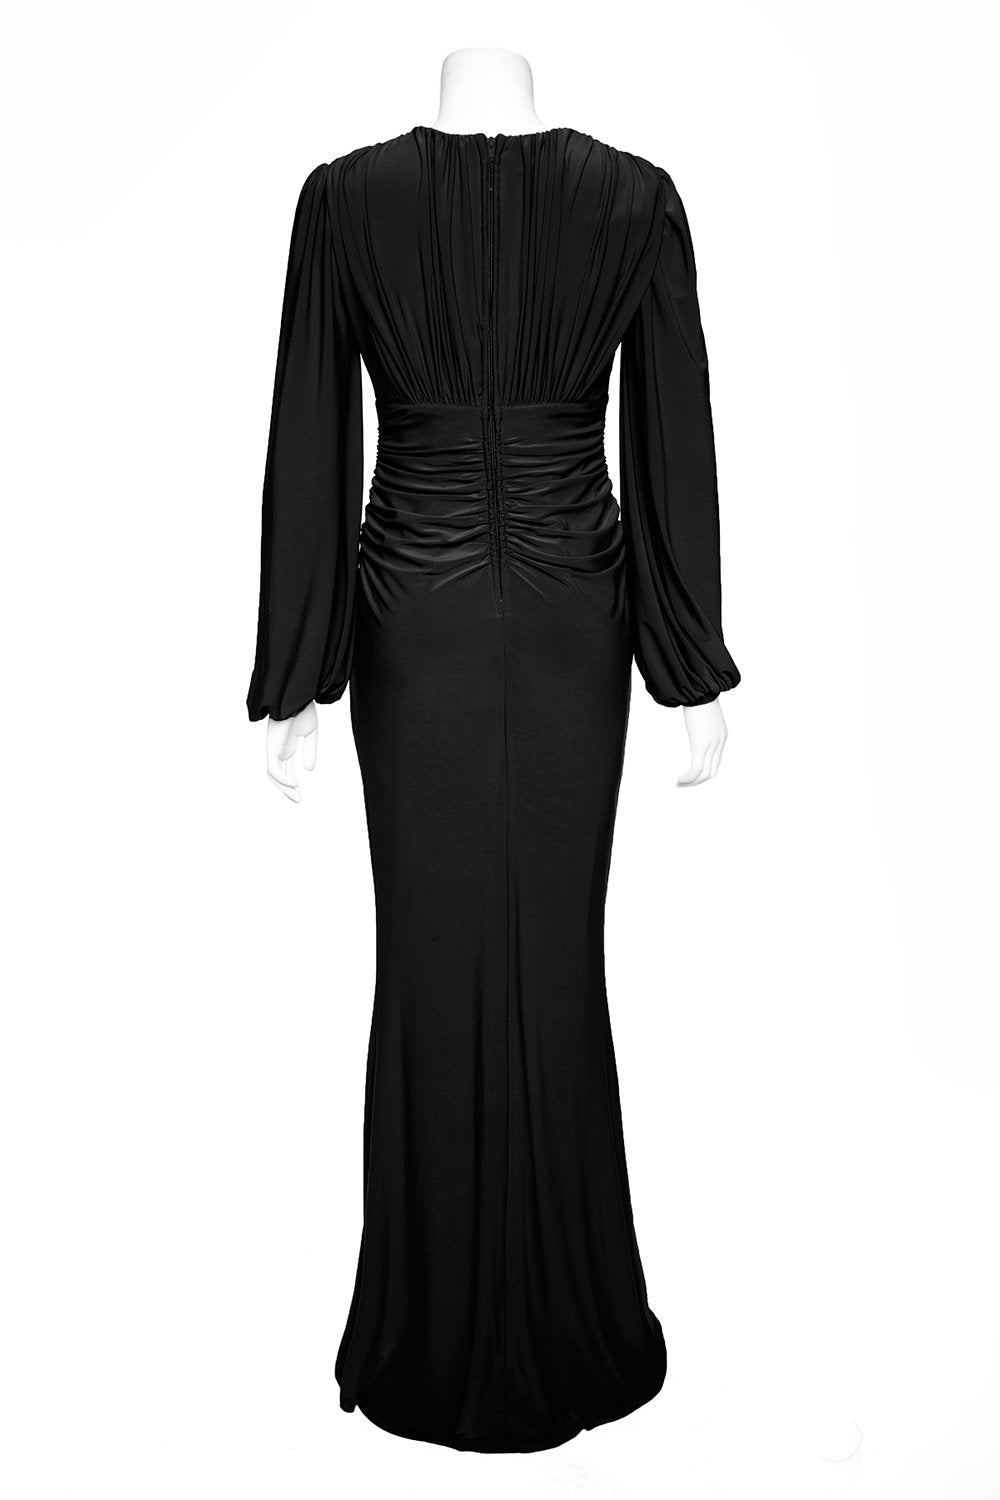 Laura Byrnes California Gia Gown in Black